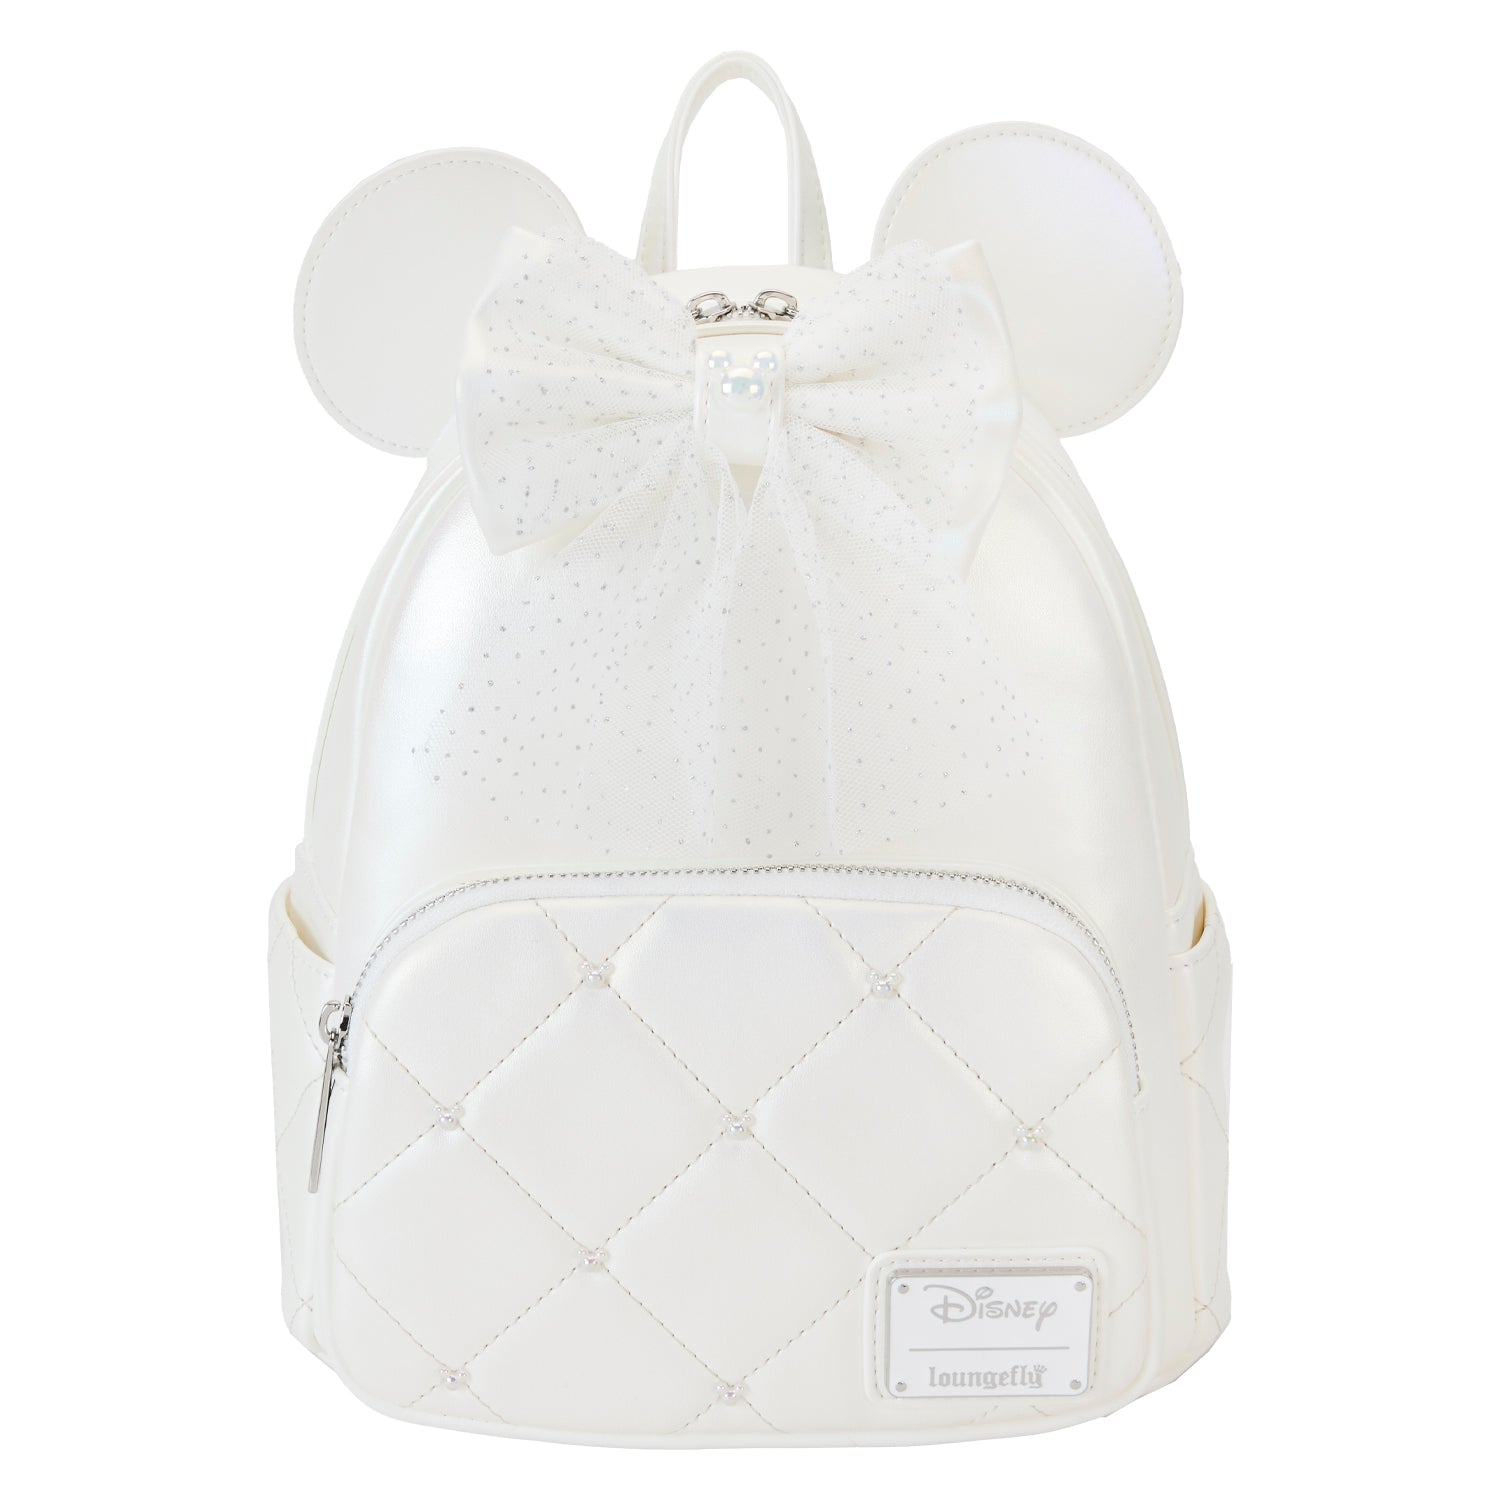 Loungefly Disney Minnie Mouse Iridescent Wedding Mini Backpack